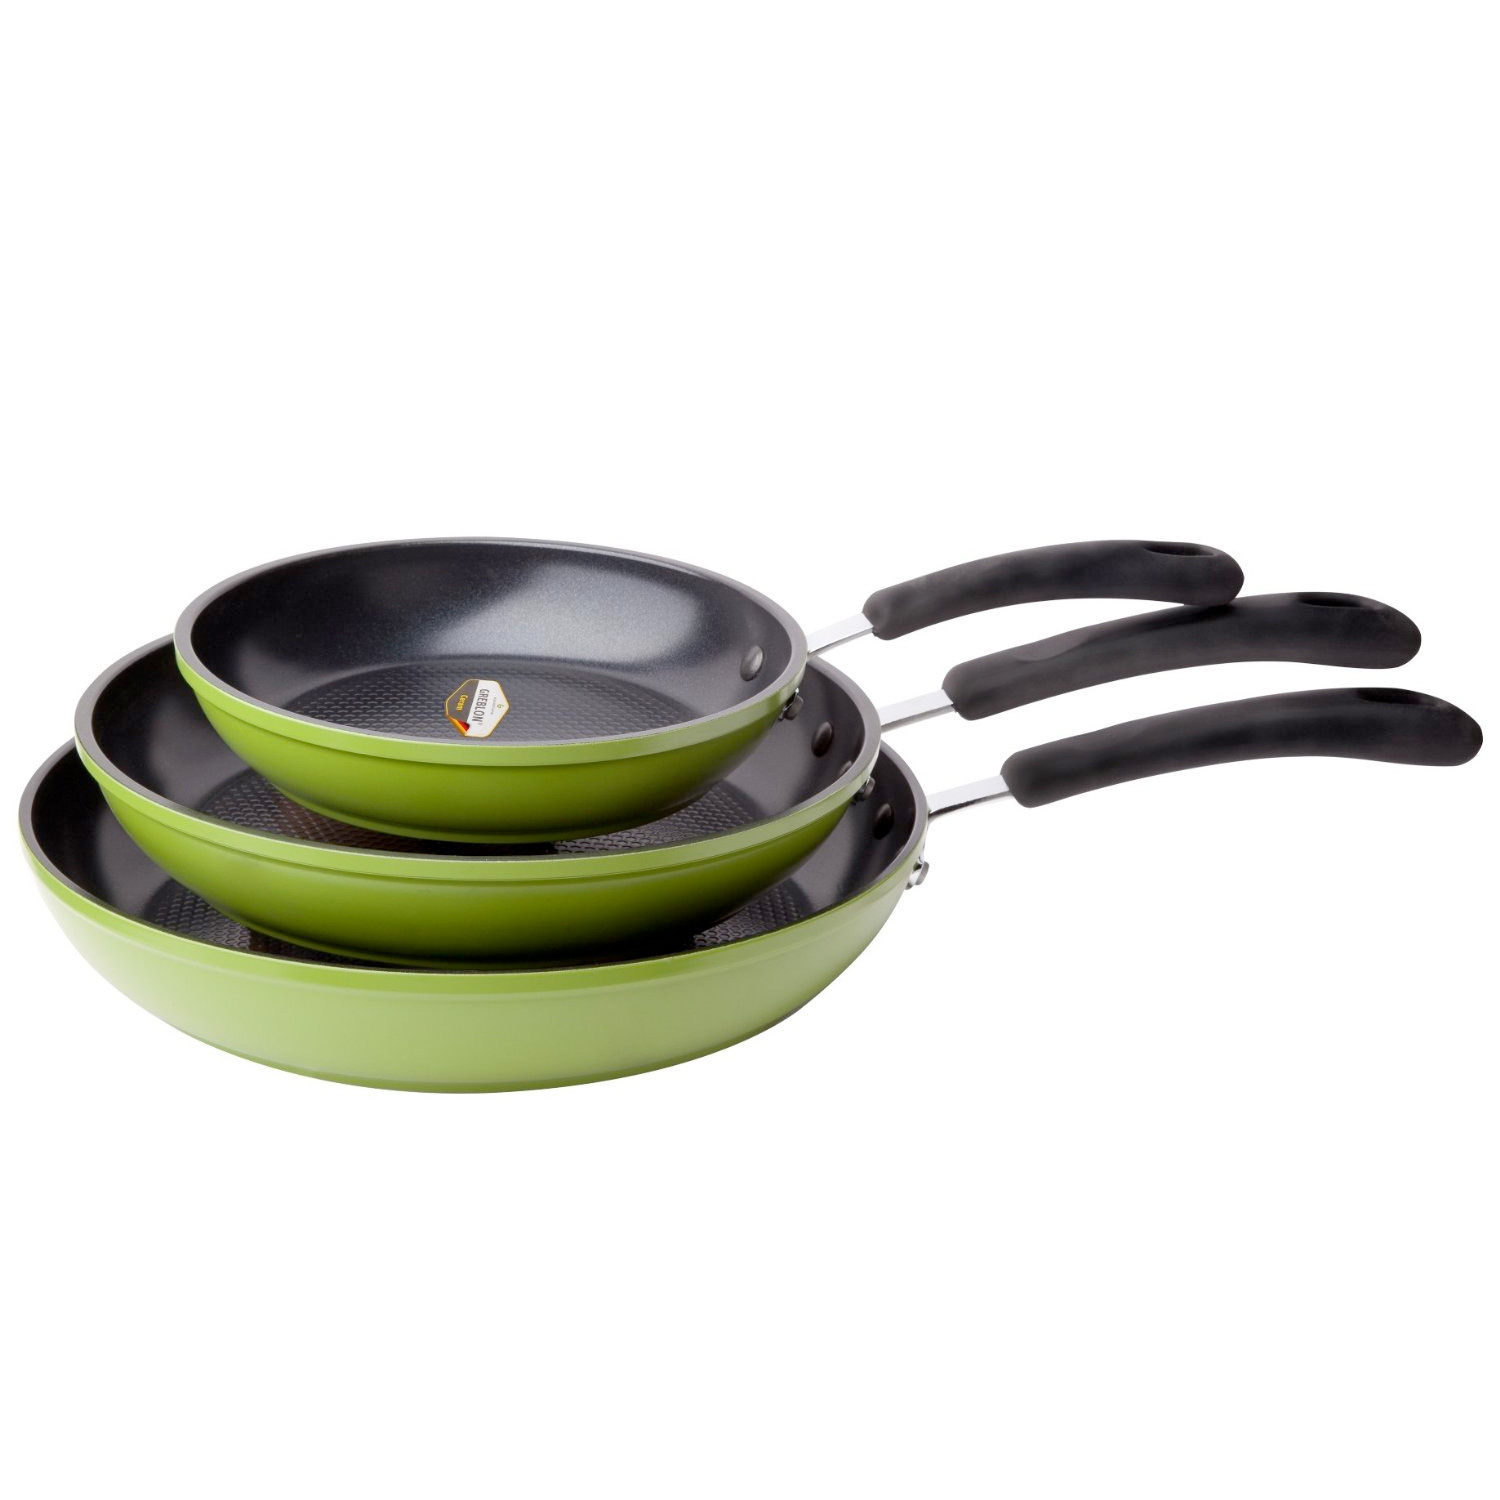 3 Piece Green Earth Frying Pan Set with Textured Nonstick Ceramic Coating